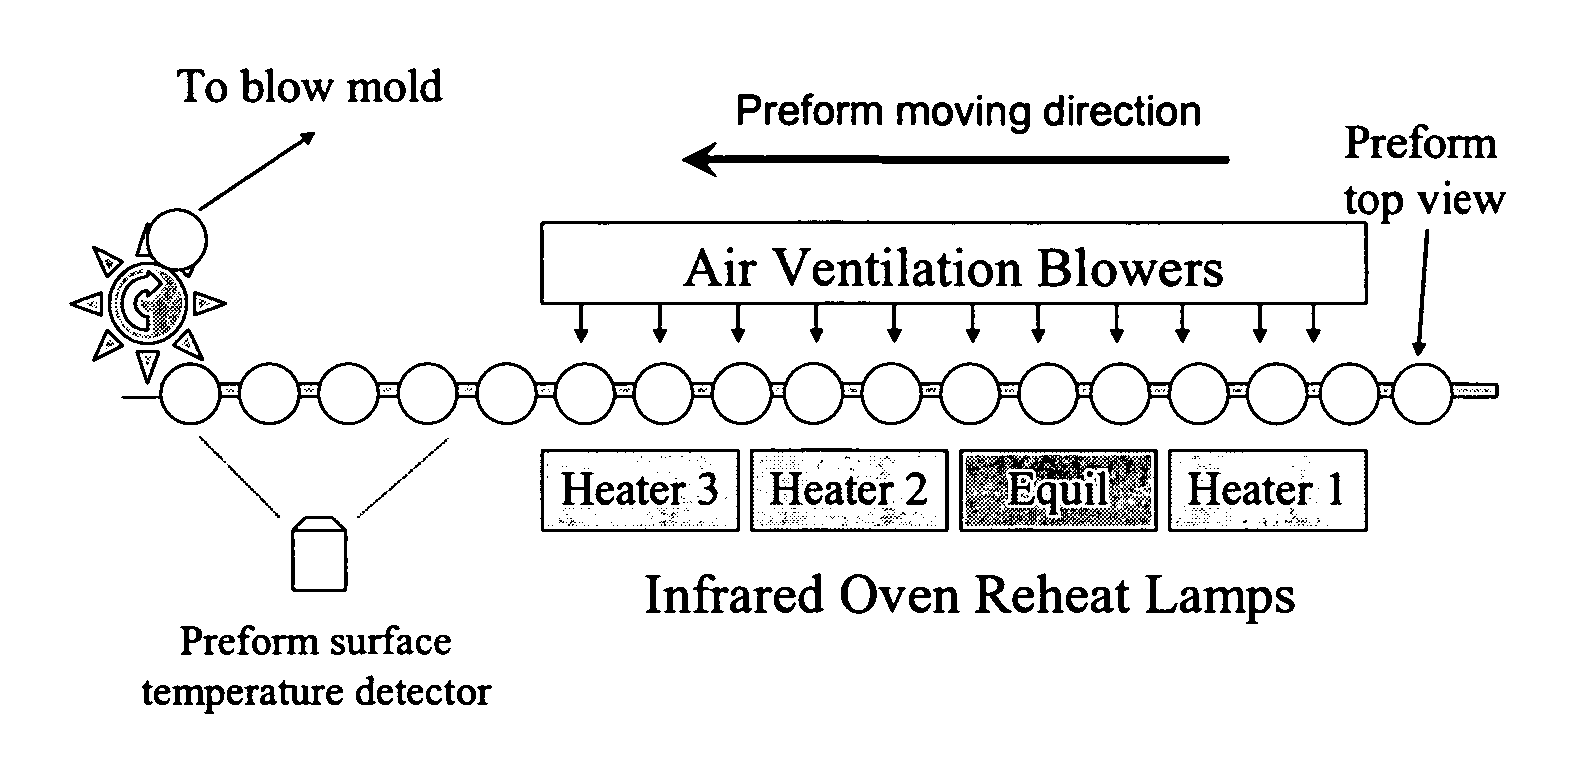 Polyester polymer and copolymer compositions containing particles of titanium nitride and carbon-coated iron